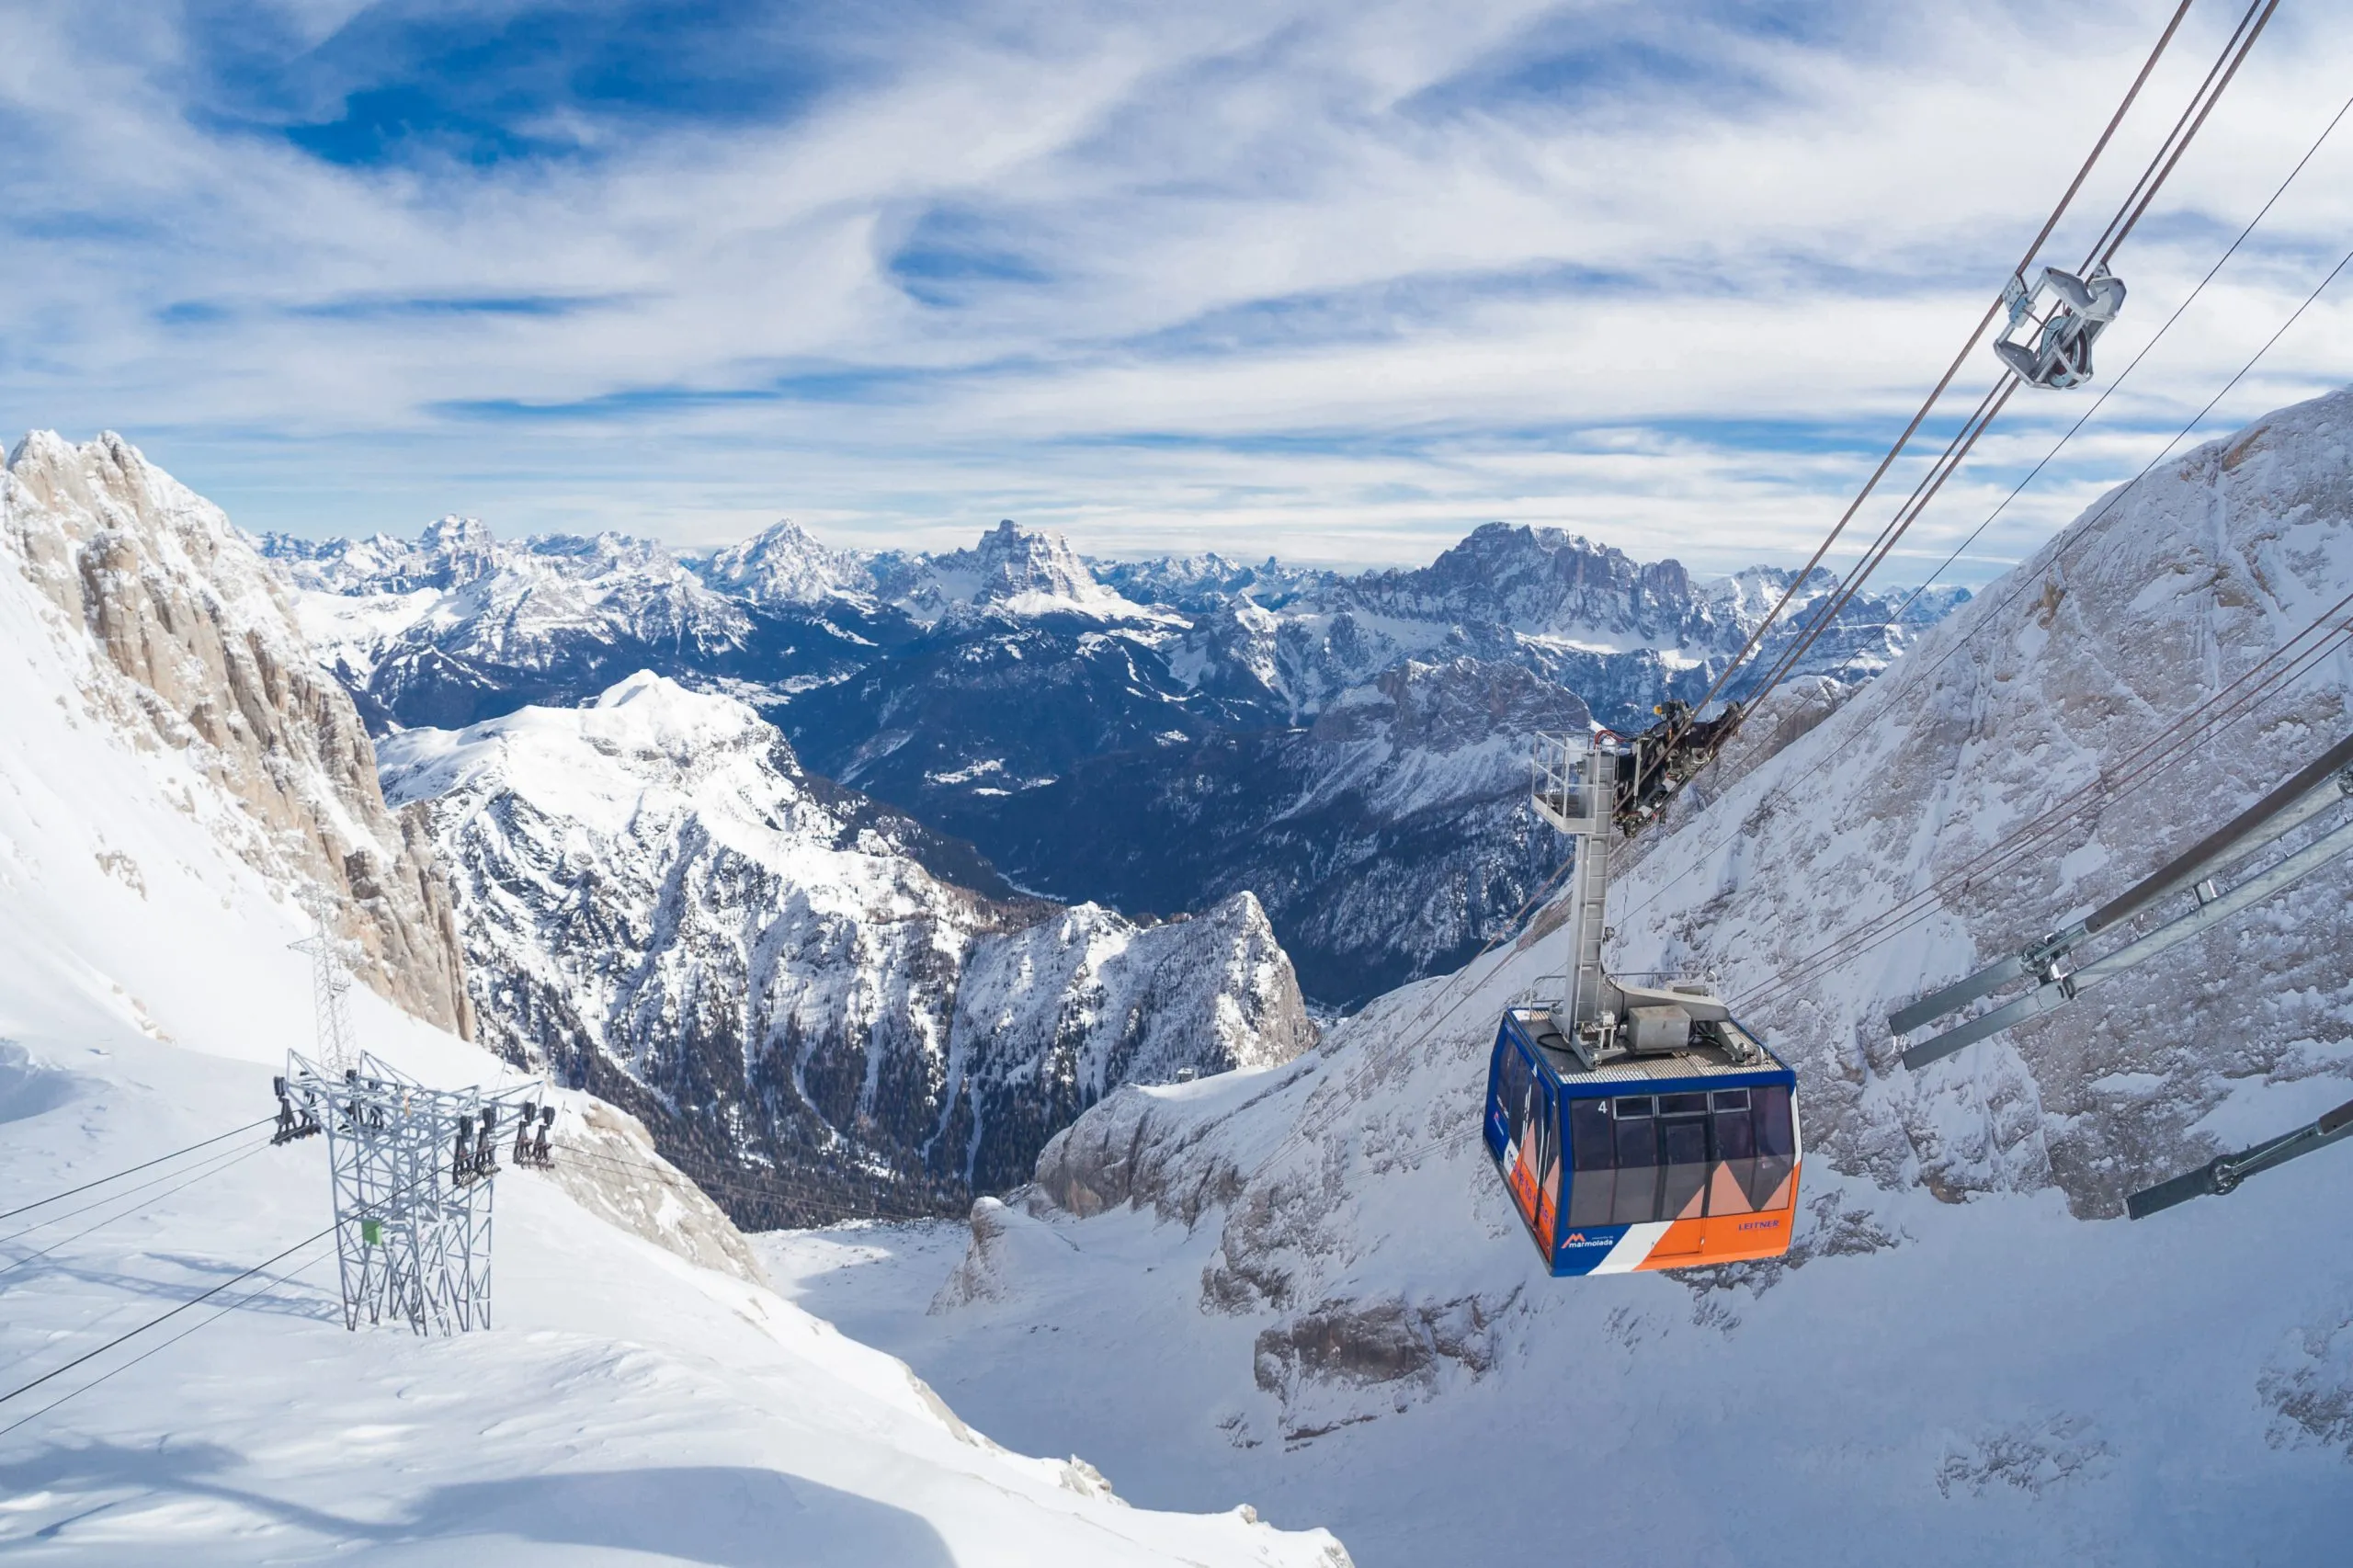 Malga Ciapela, Italy -  February 04, 2015: You can see one of the cable car that runs to the Marmolada glacier.